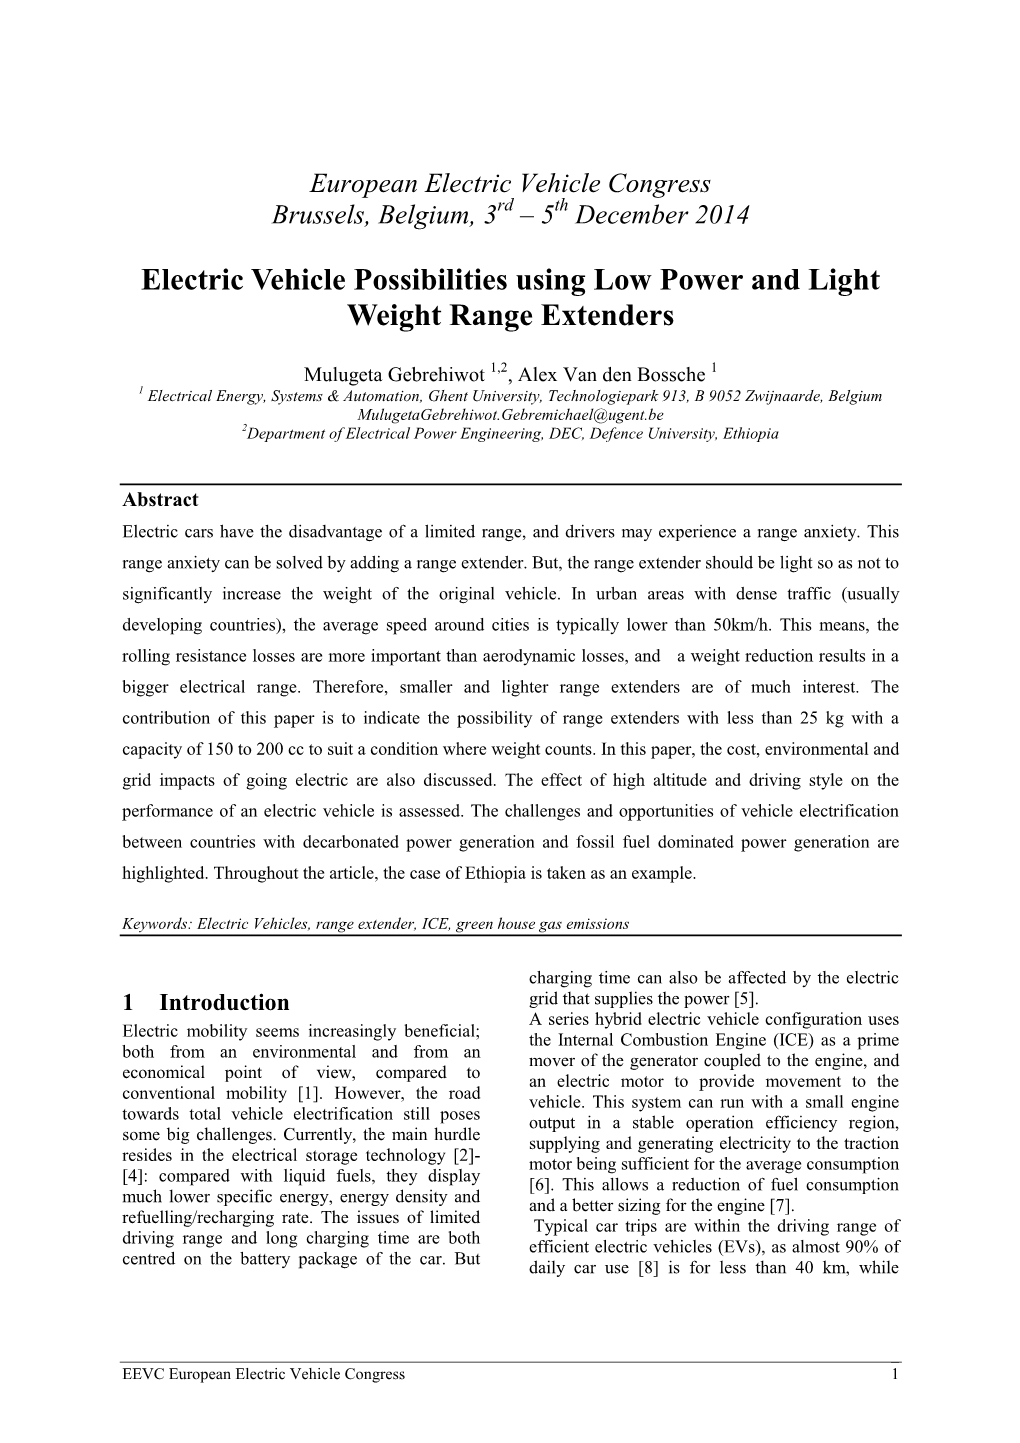 Electric Vehicle Possibilities Using Low Power and Light Weight Range Extenders